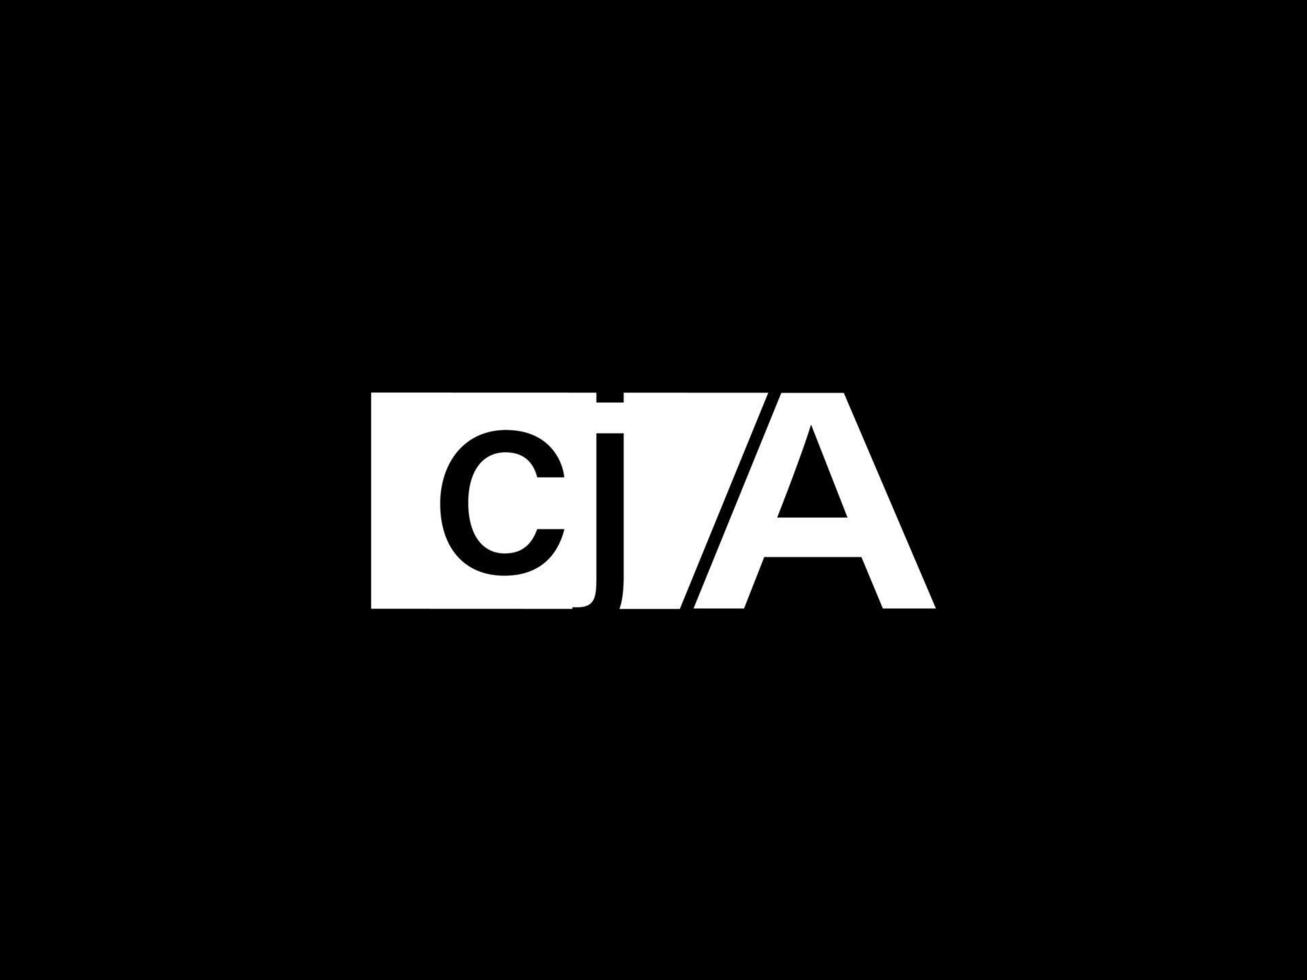 CJA Logo and Graphics design vector art, Icons isolated on black background